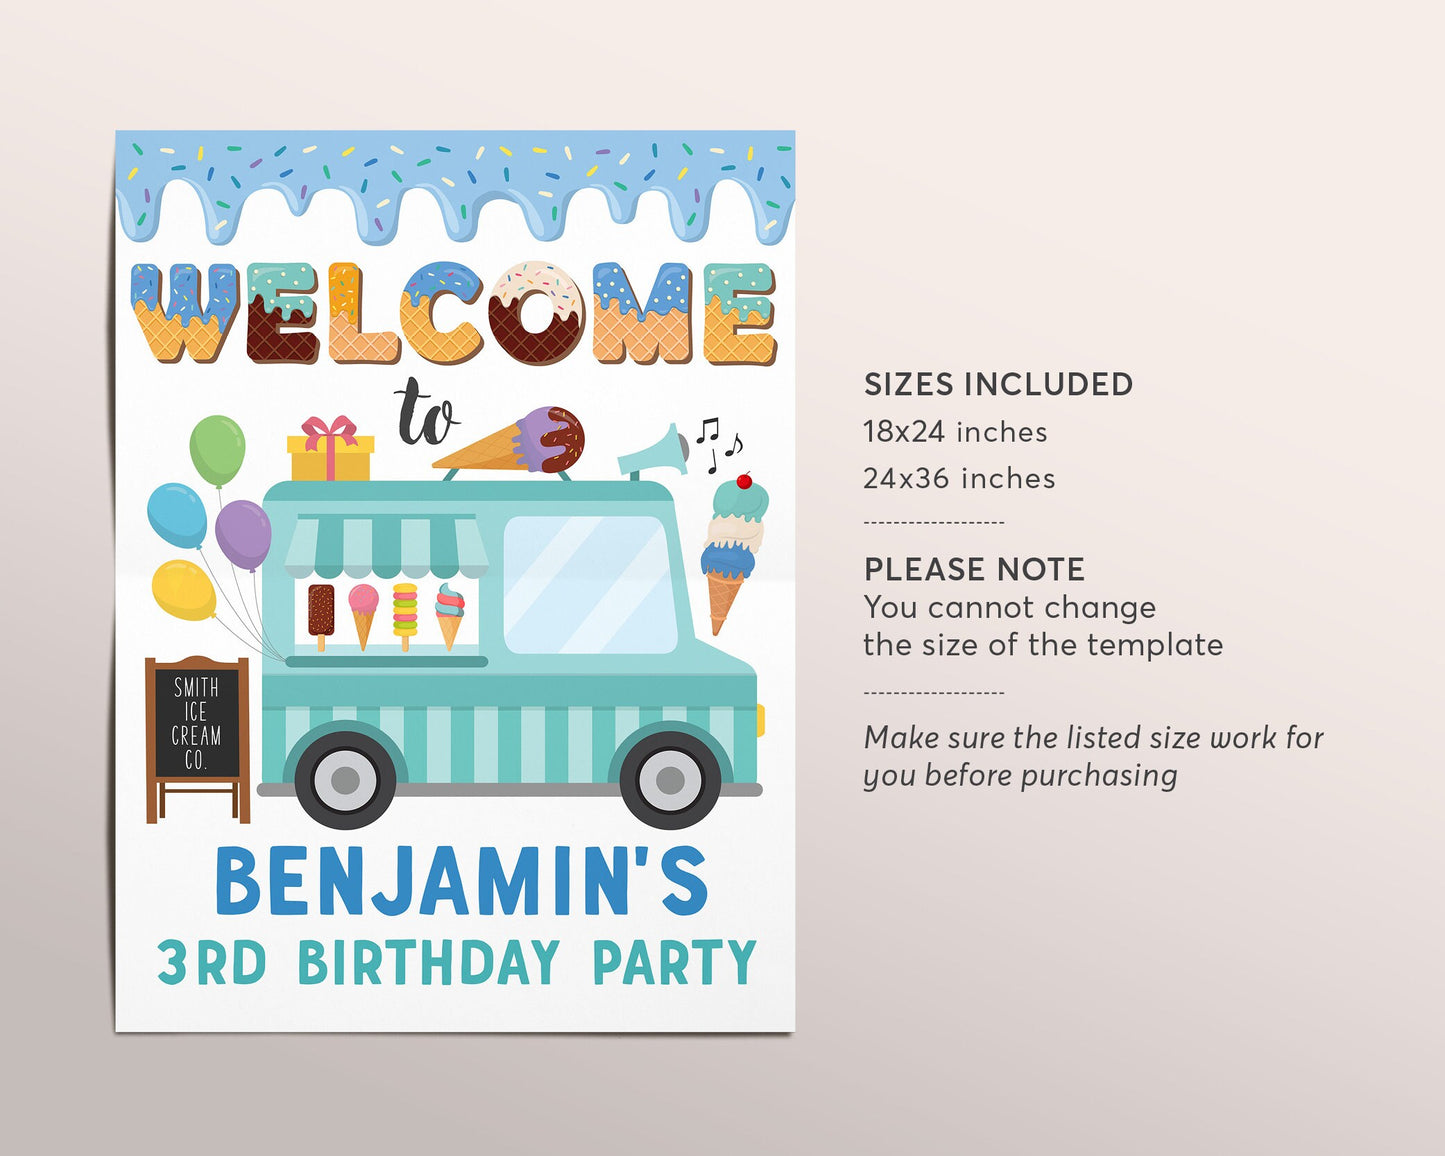 Ice Cream Truck Birthday Party Welcome Sign Editable Template, Boy Summer Sprinkles Here's the Scoop Poster Decor Pink Blush Party Balloons